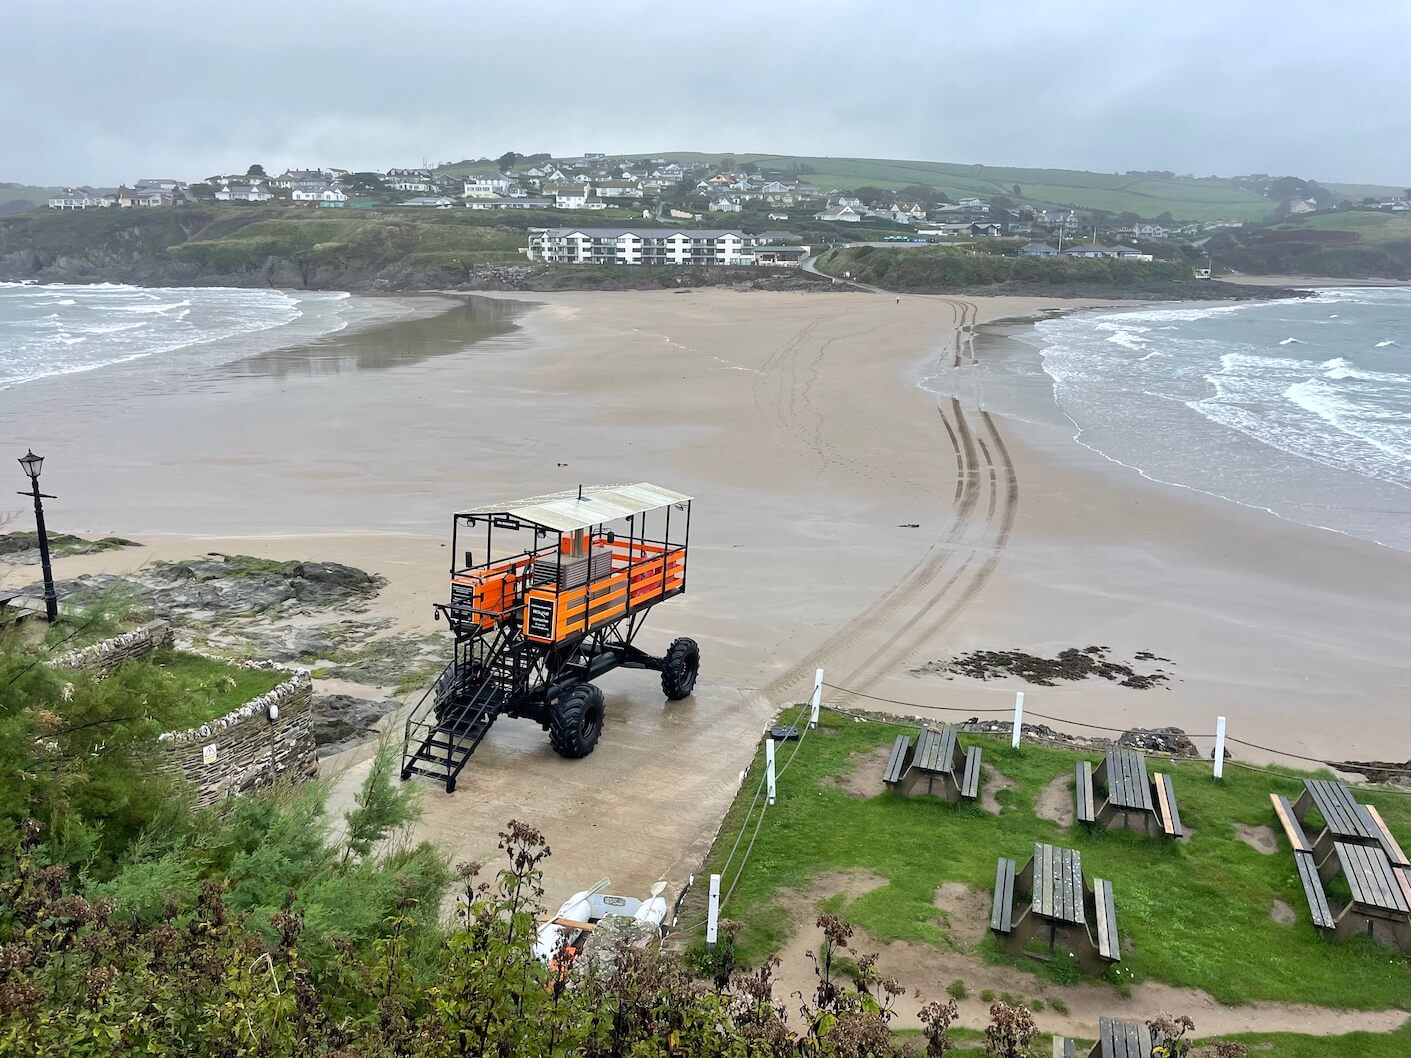 The view of the sea tractor and beach from Burgh Island hotel